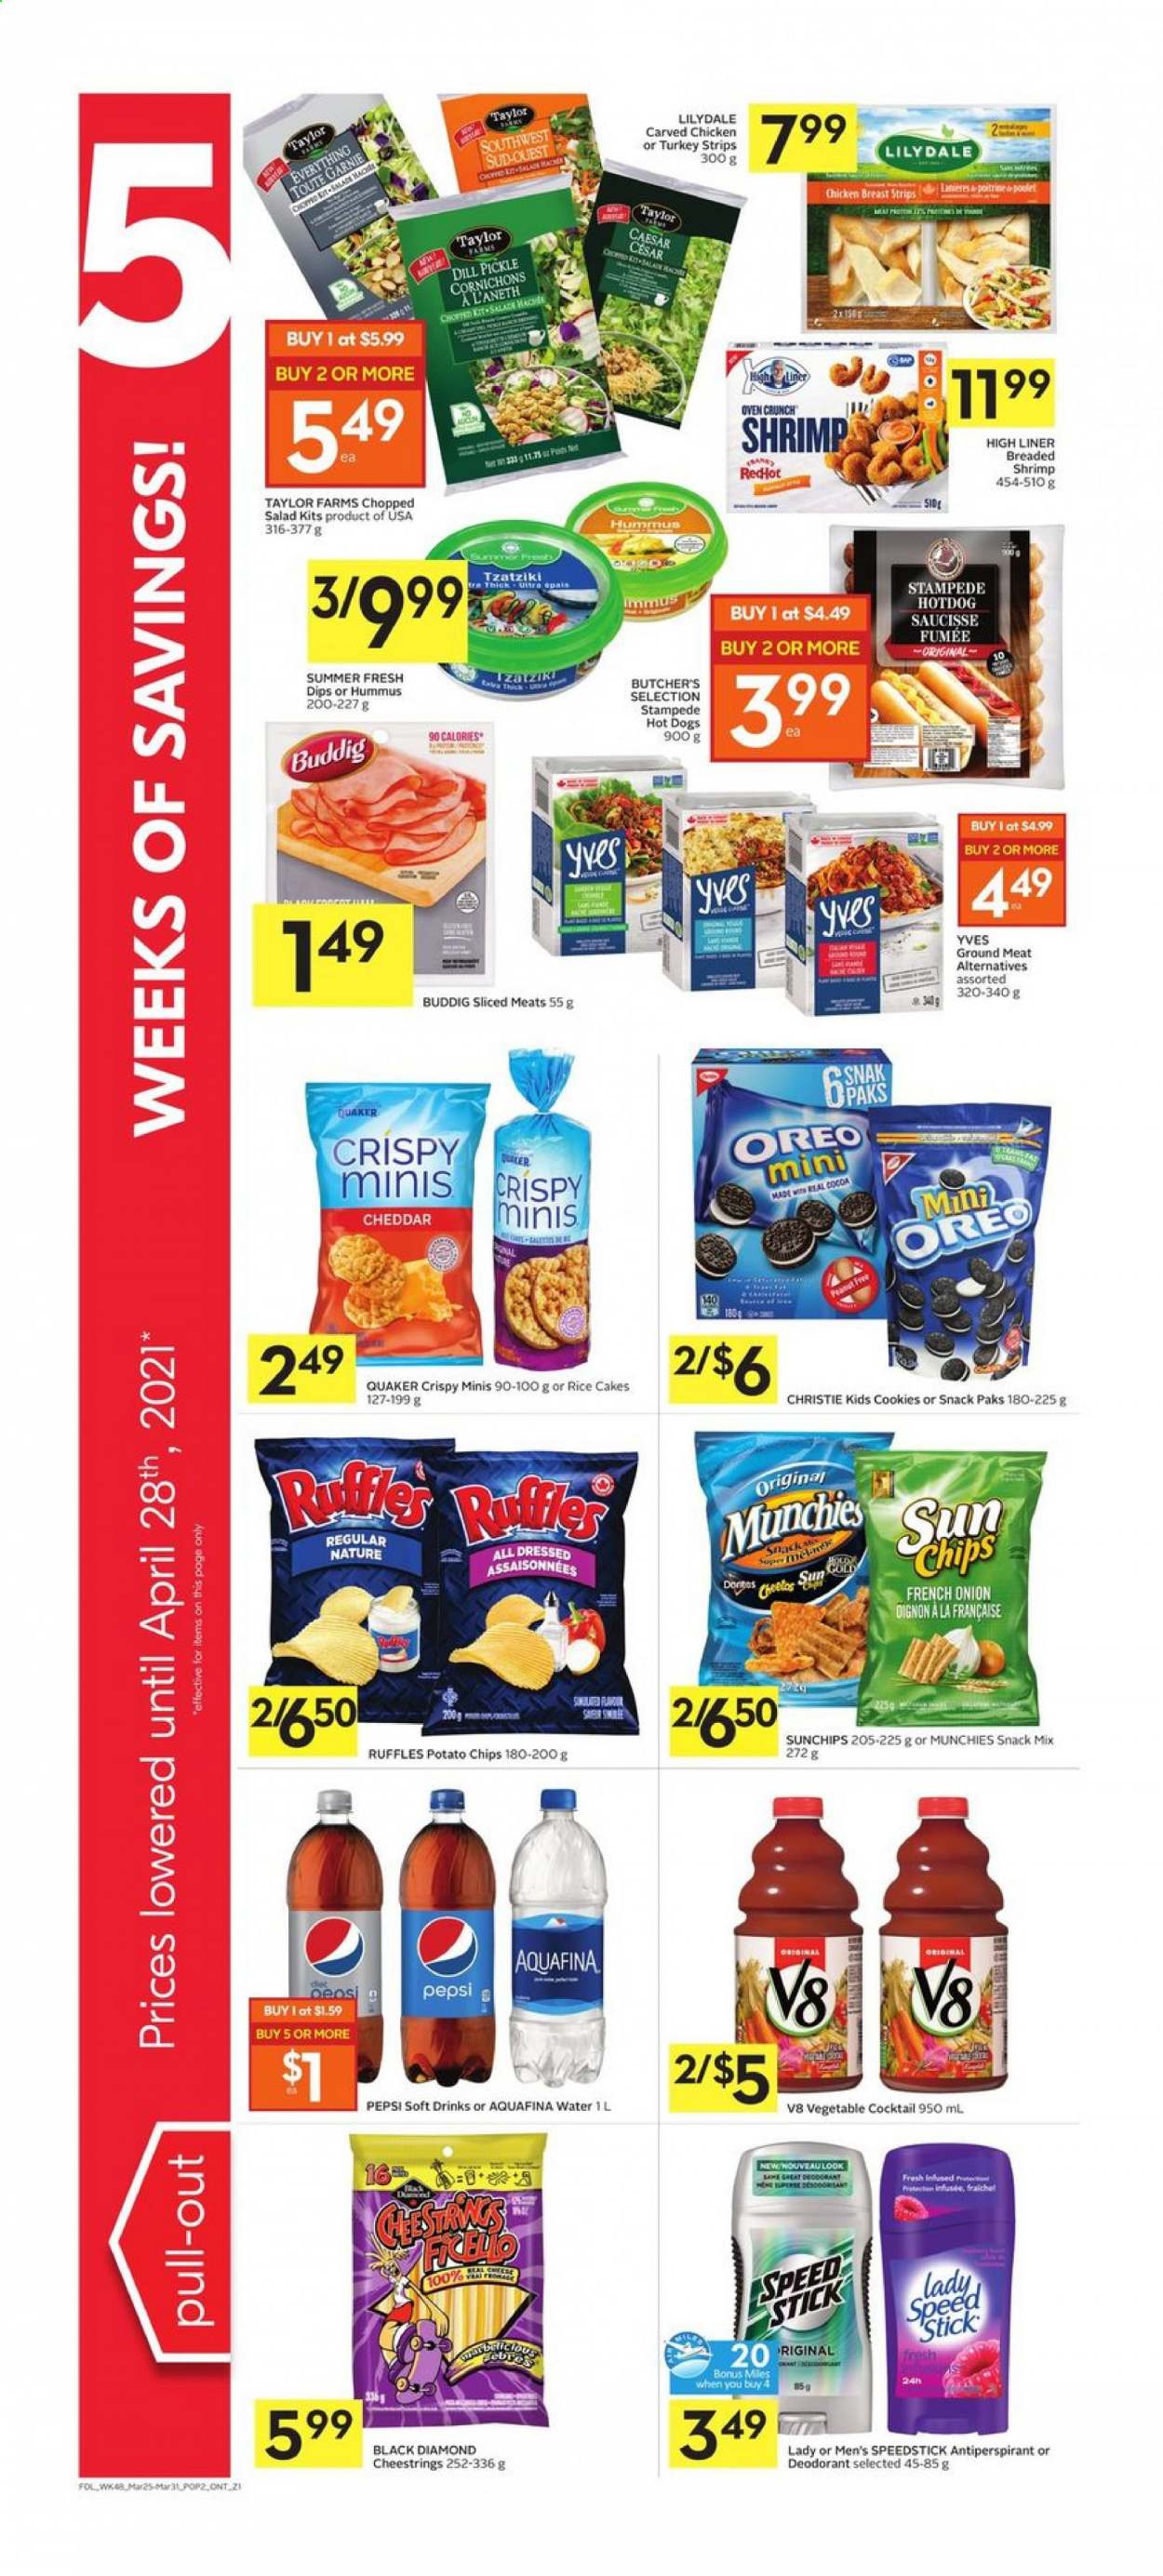 thumbnail - Foodland Flyer - March 25, 2021 - March 31, 2021 - Sales products - onion, salad, chopped salad, shrimps, hot dog, Quaker, tzatziki, hummus, string cheese, cheese, Oreo, strips, cookies, dill pickle, potato chips, Ruffles, cocoa, dill, Pepsi, soft drink, Aquafina, chicken, chips, deodorant. Page 3.